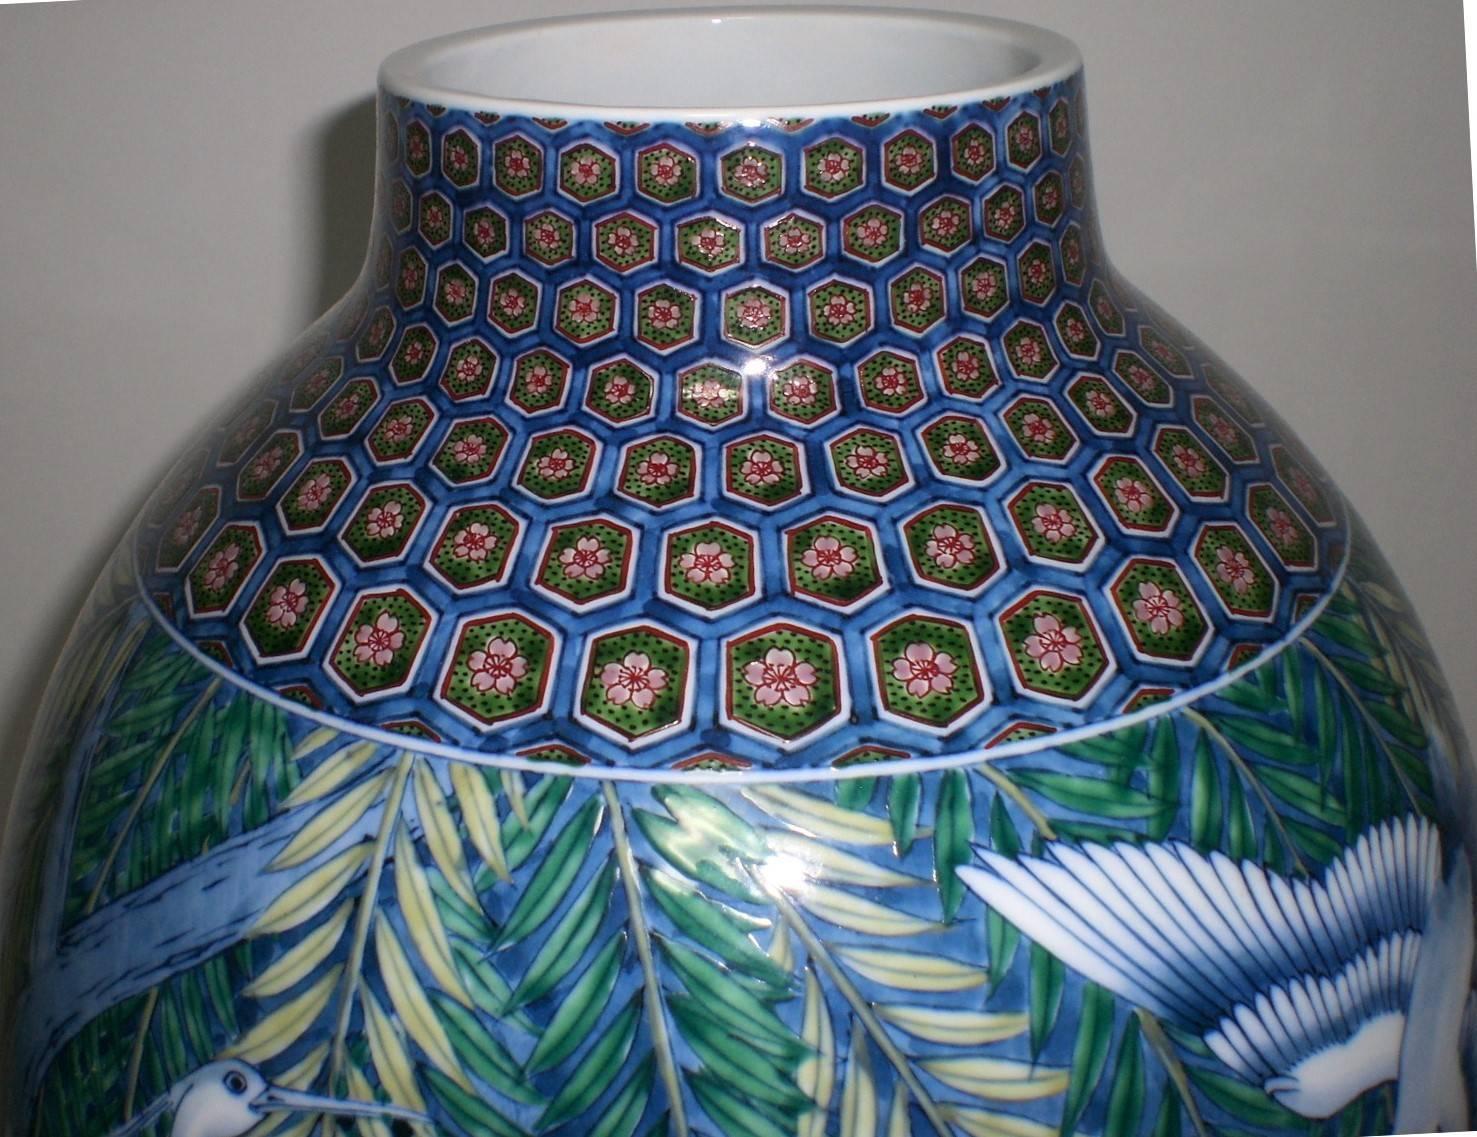 Unique Japanese Imari contemporary decorative porcelain vase, hand-painted on a stunningly shaped body, a masterpiece by master porcelain artist of the Imari-Arita region of southern island of Kyushu in Japan (1931-2009). He was admired for his